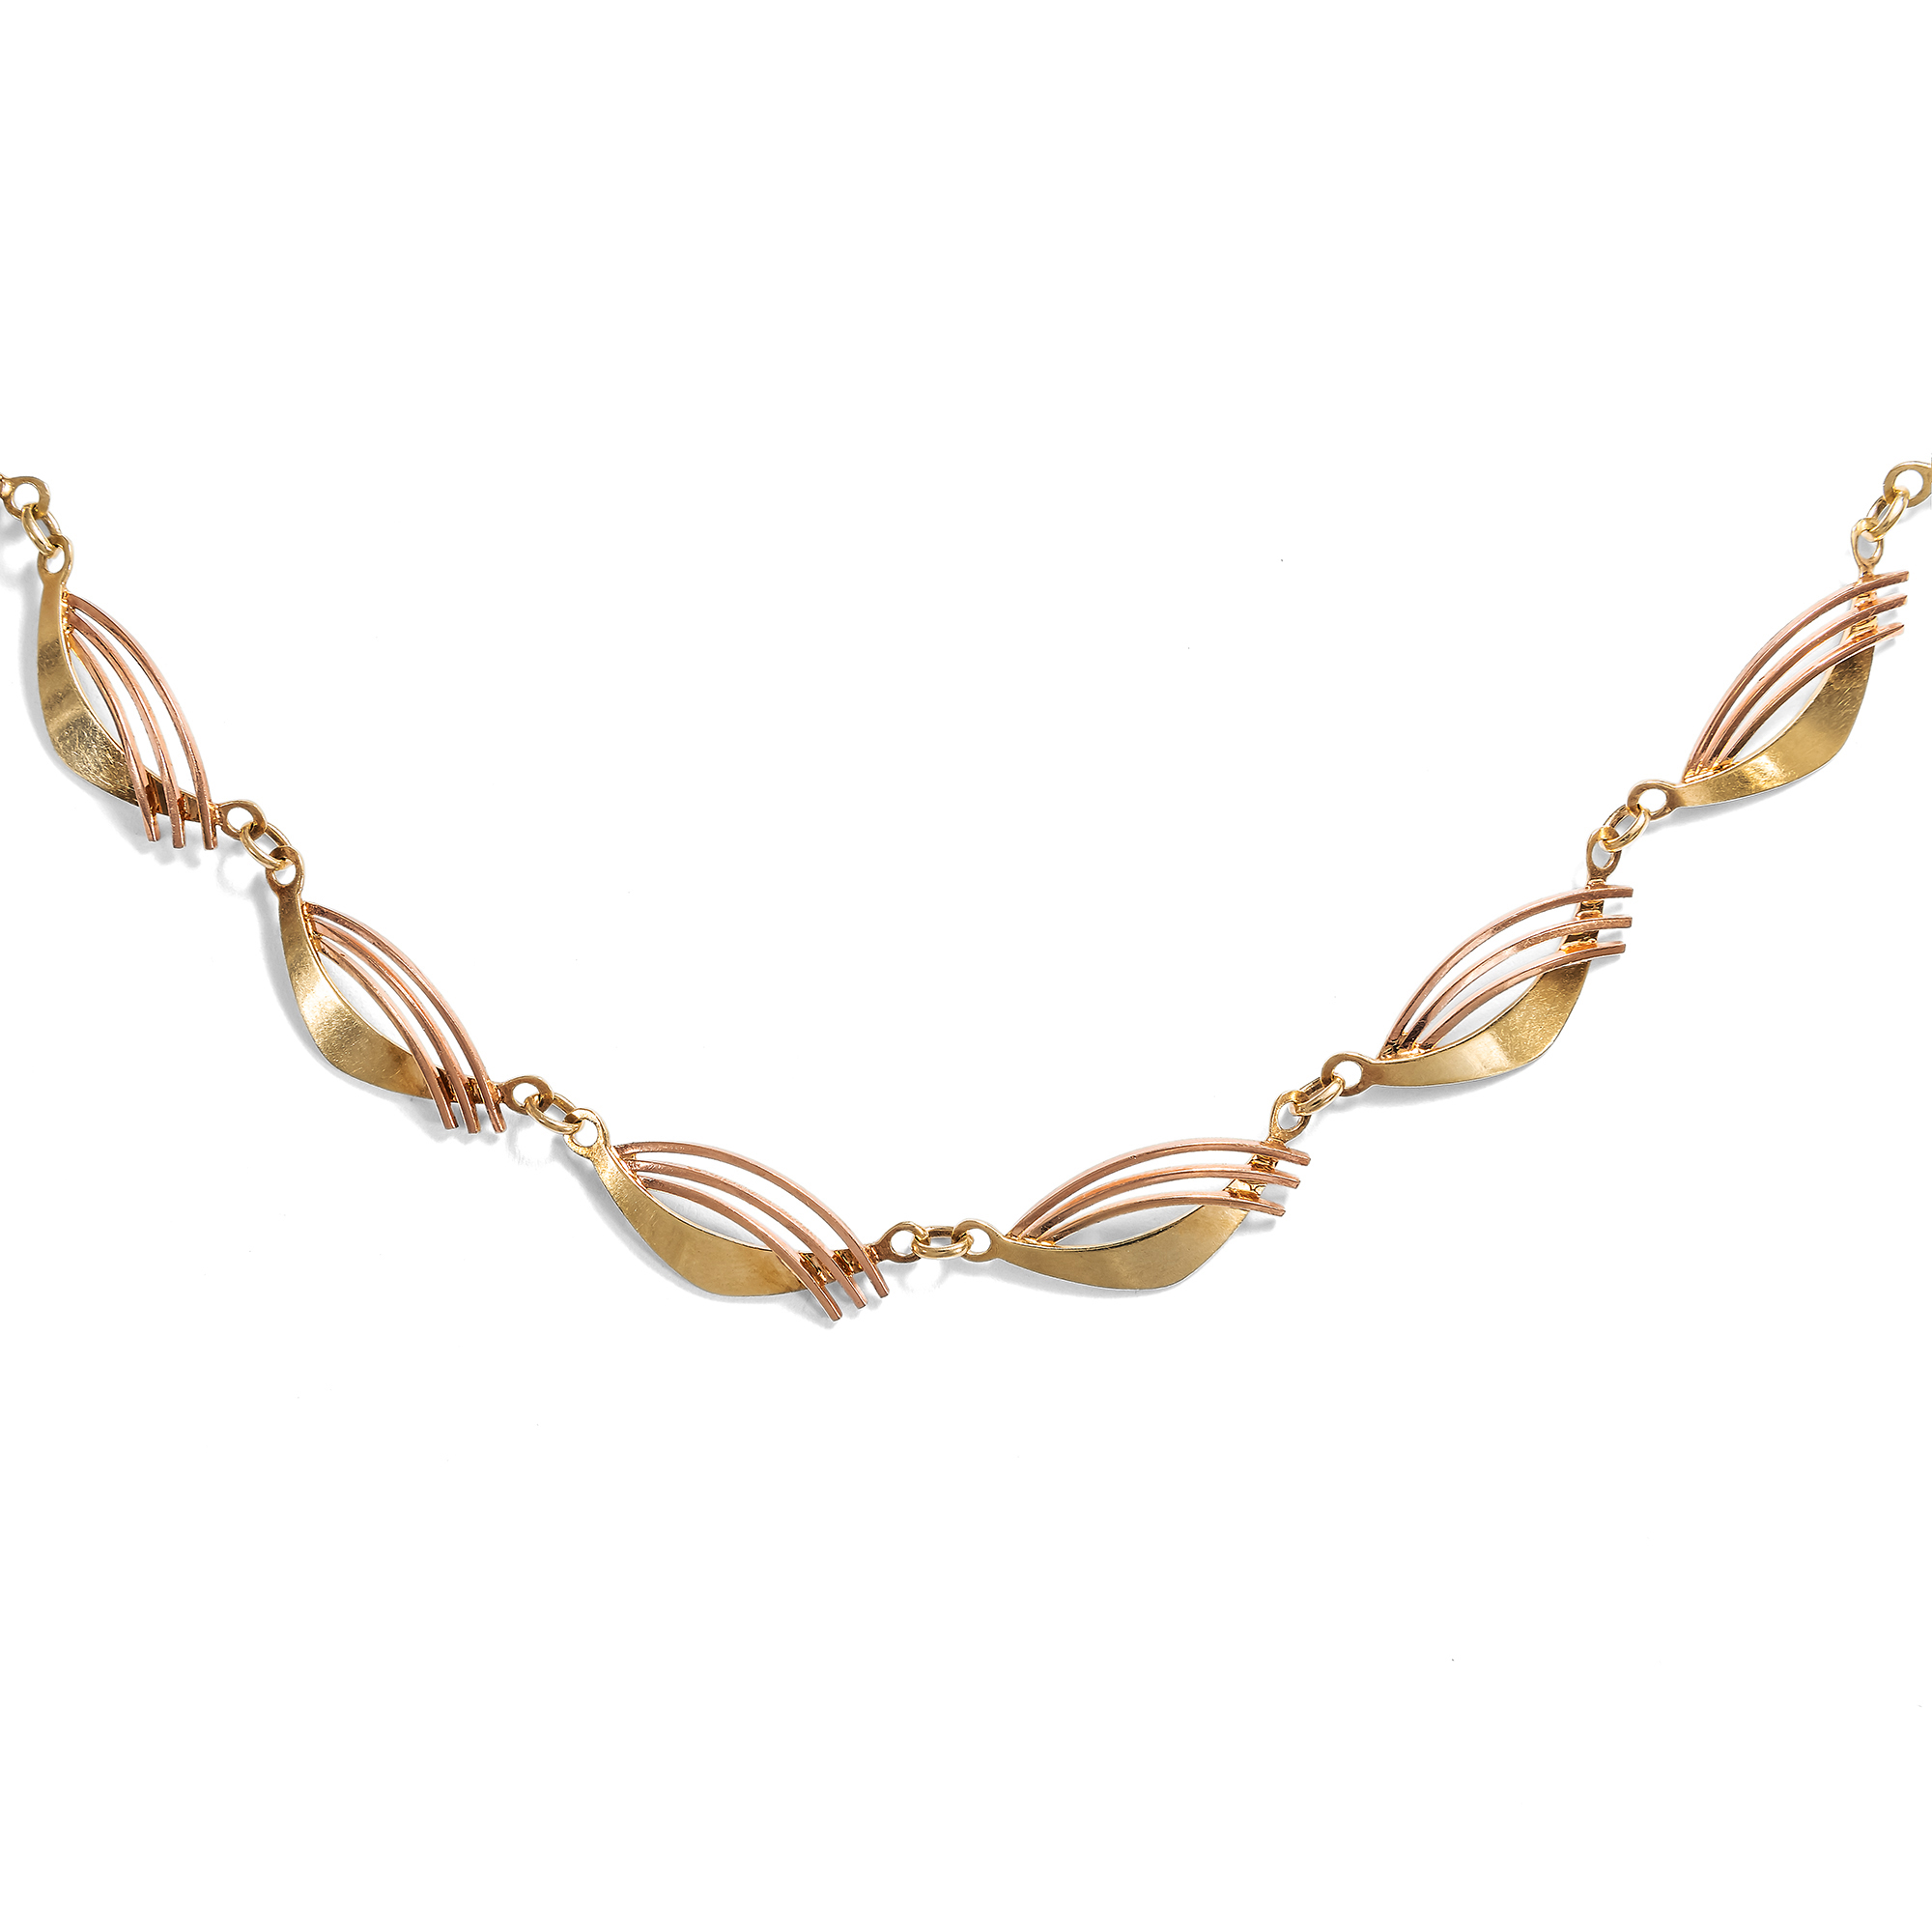 Vintage Necklace in Two-Coloured Gold by Andreas Daub, Germany c. 1955